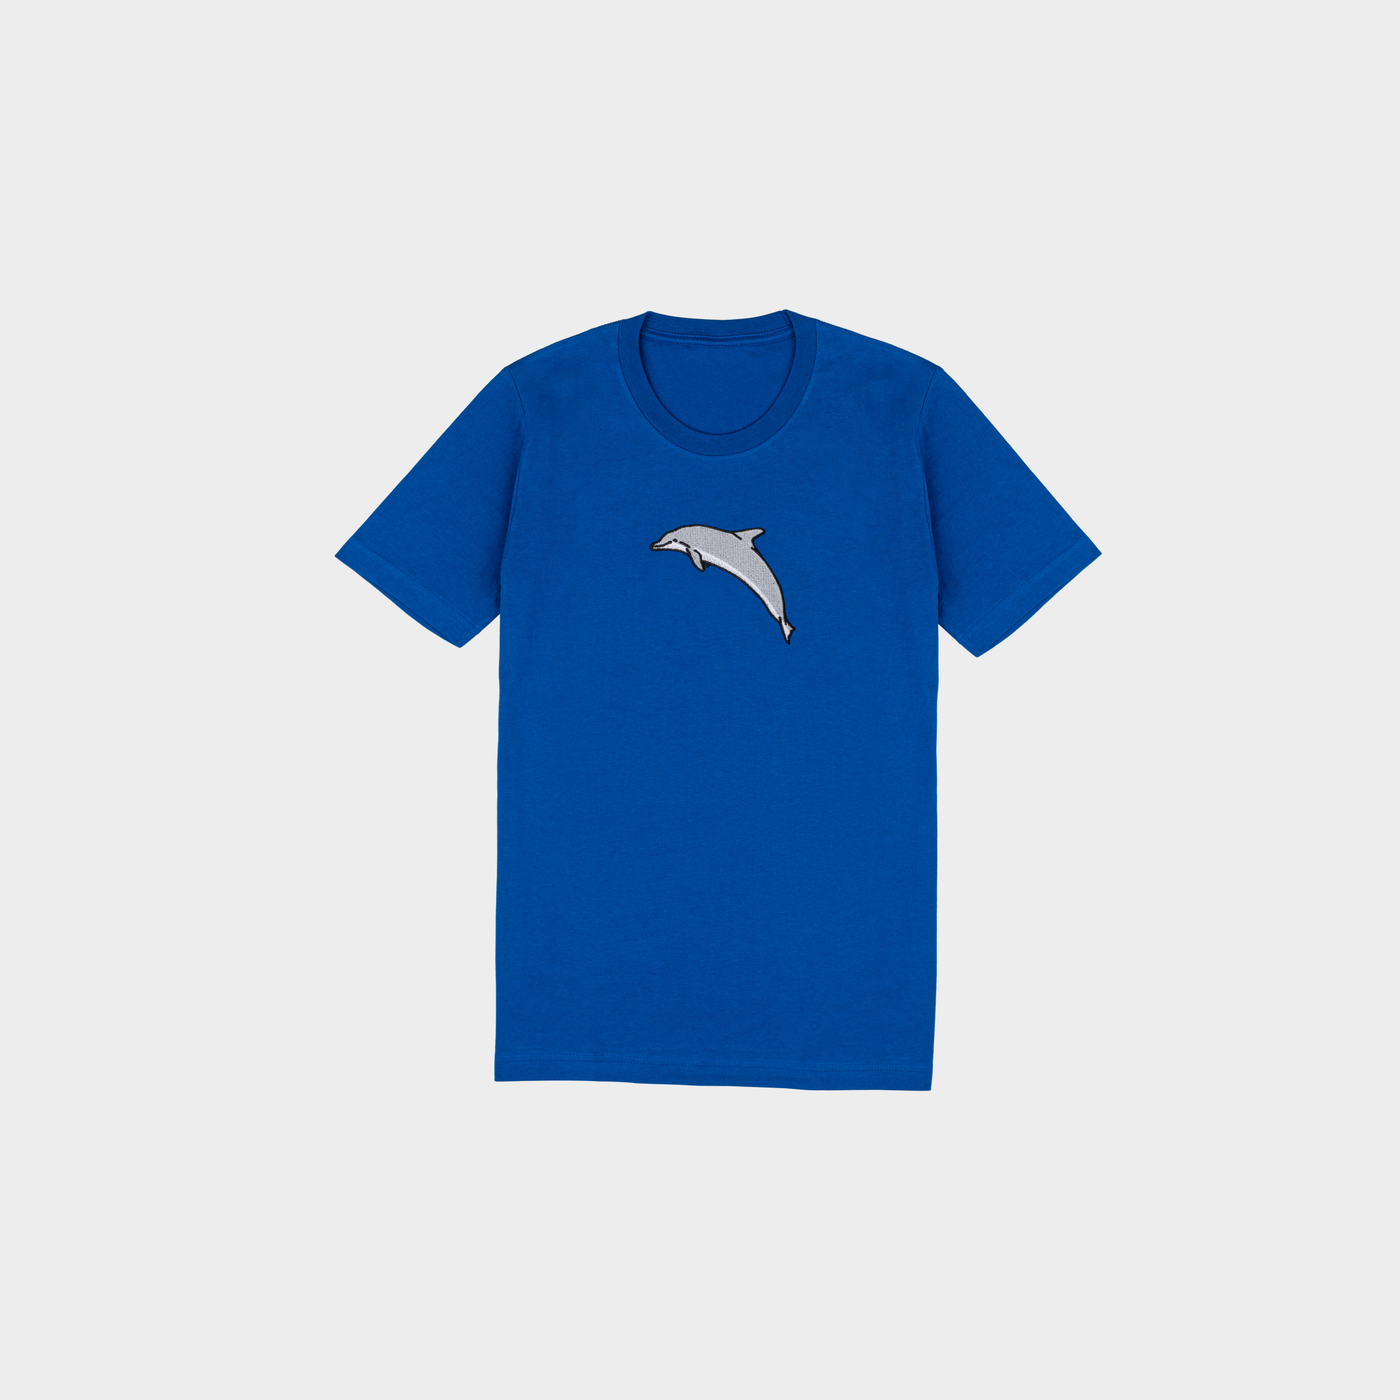 Bobby's Planet Kids Embroidered Dolphin T-Shirt from Seven Seas Fish Animals Collection in True Royal Color#color_true-royal